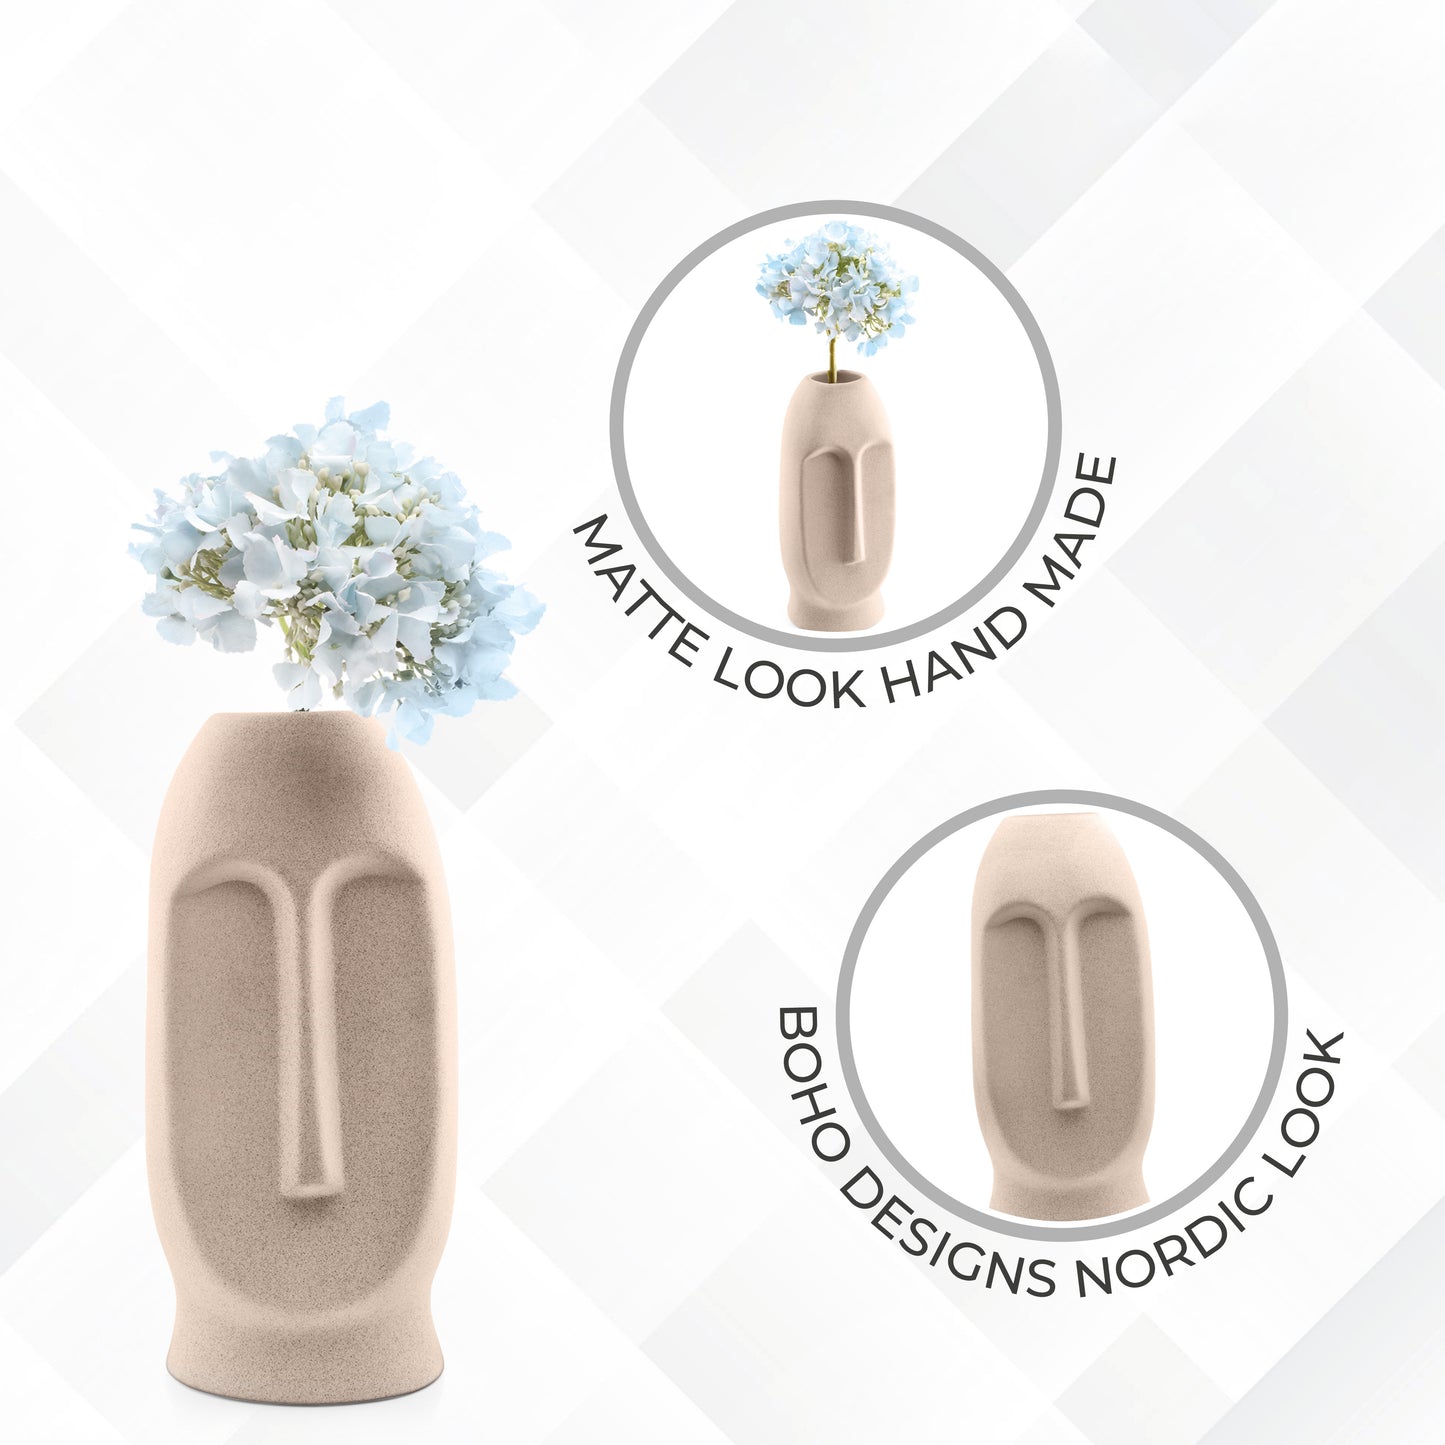 LuxeLane 'Face Vase' for Home Decor - Matte Beige, 9 inches, Pack of 1